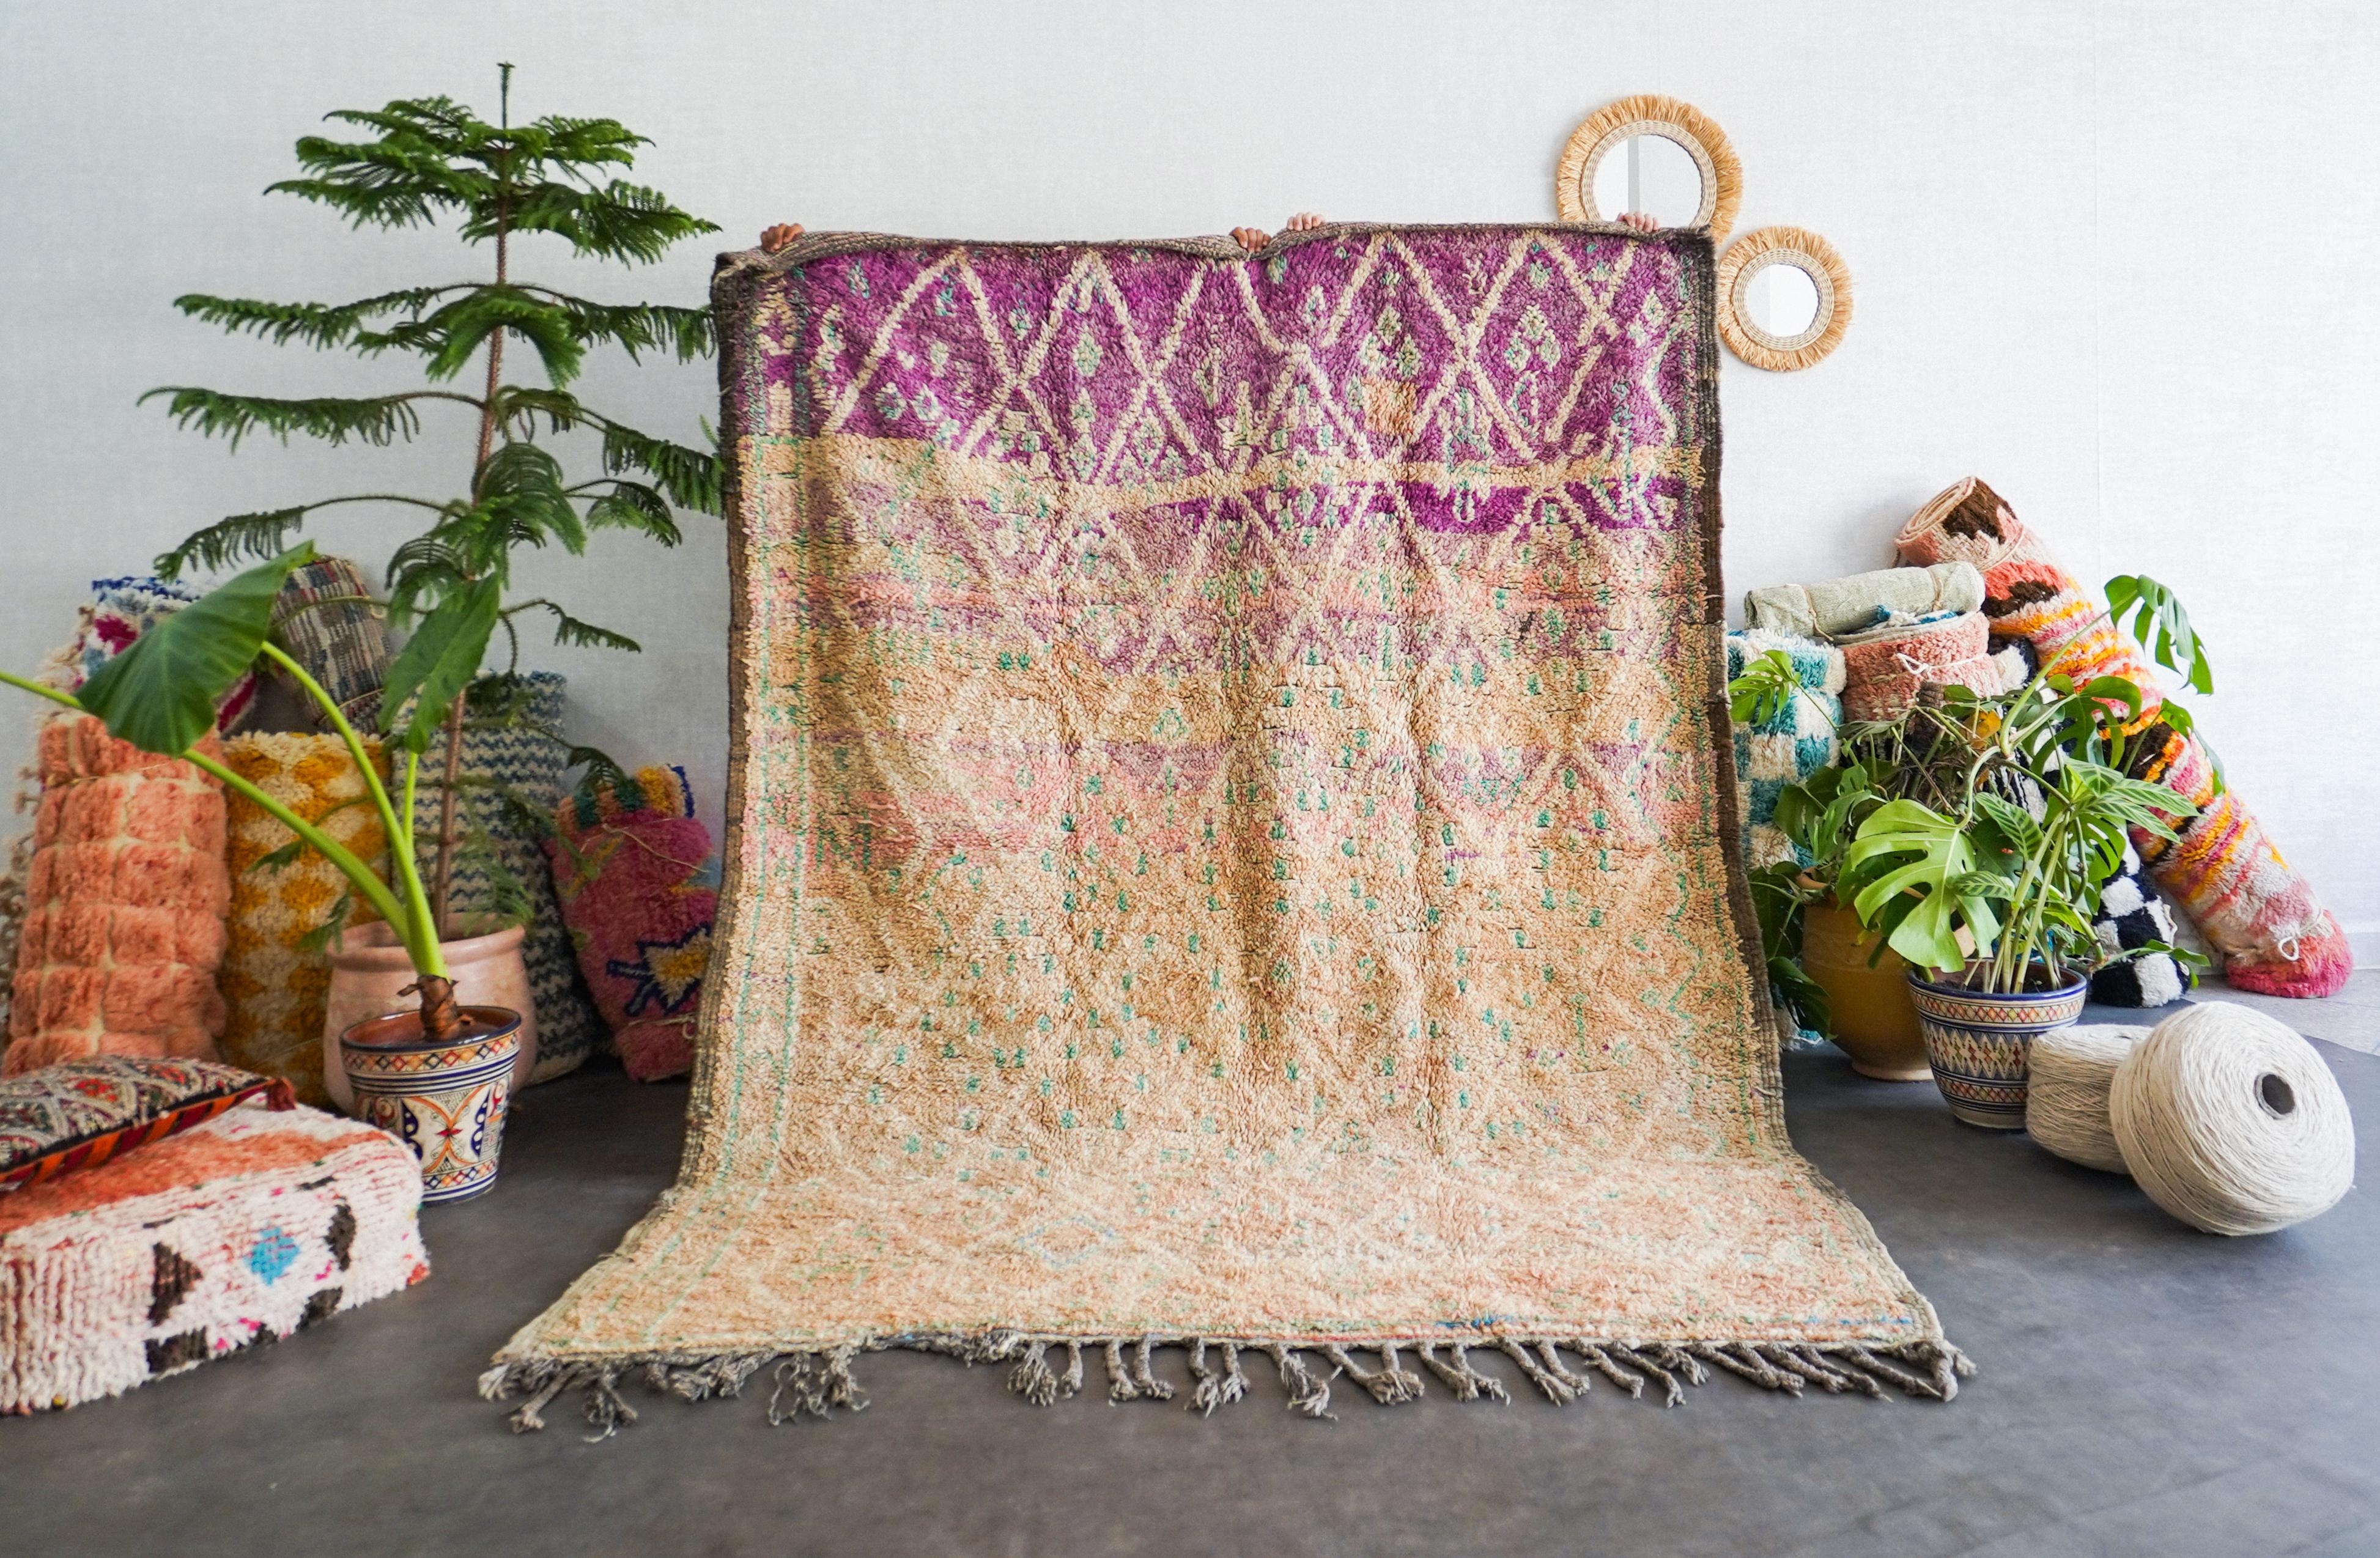 KD02 6.8x9 Ft 205x270 Cm - 1

KD03 6.6x14 Ft 200x420 Cm

Uncover the rich heritage woven into our beige & purple Moroccan vintage rug. Handmade by skilled artisans using time-tested techniques, each Berber rug is a unique narrative, echoing the